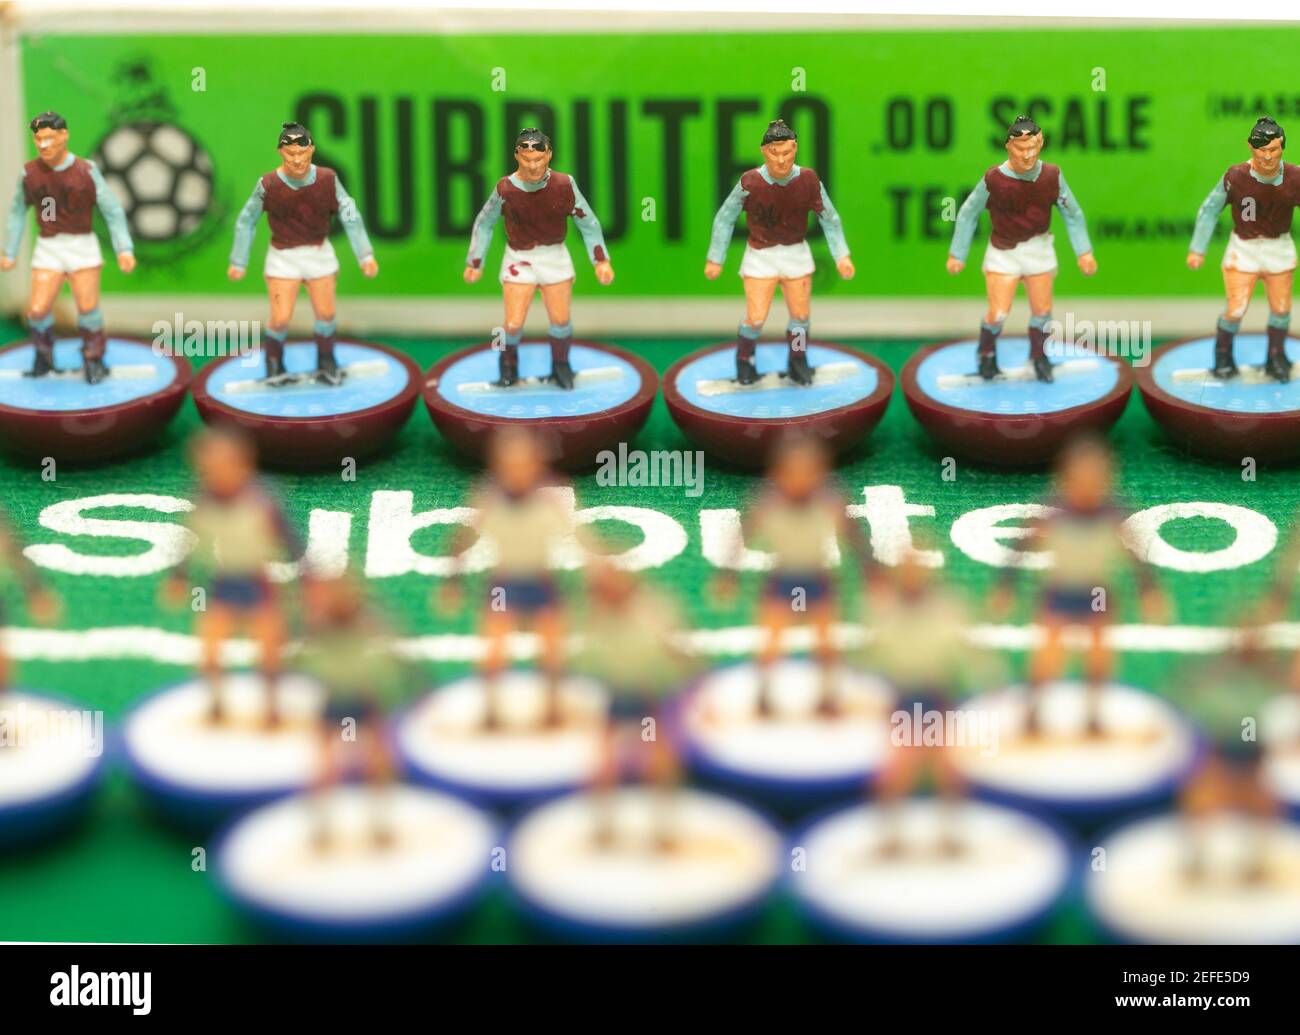 Subbuteo figures and accessory boxes Stock Photo